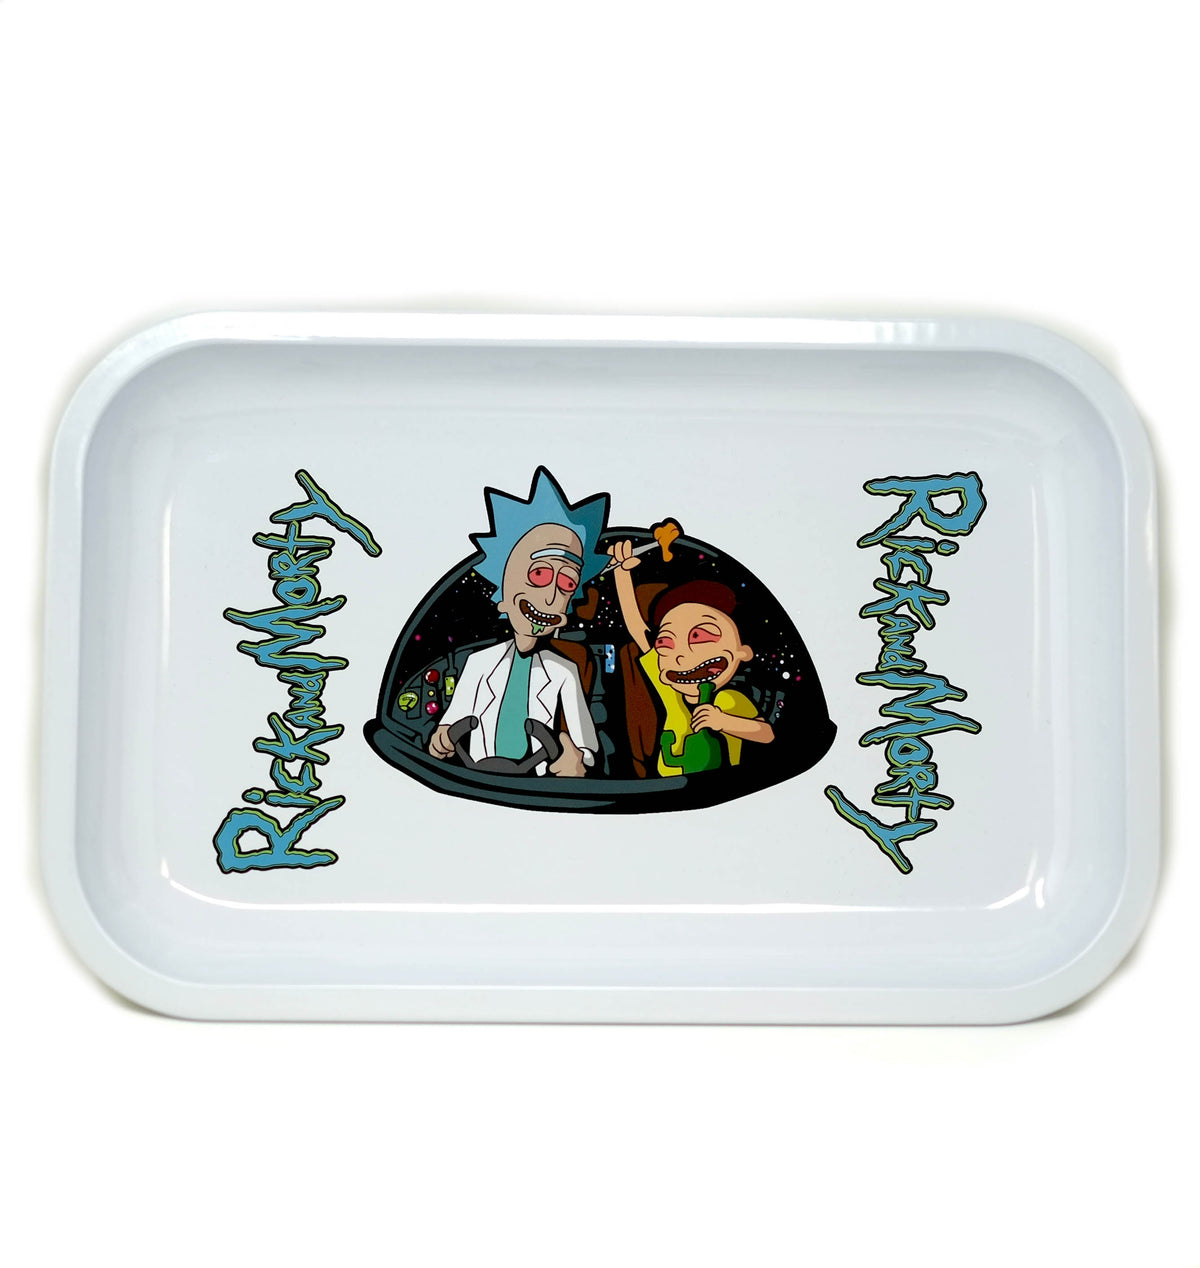 RM cartoon Metal tray for Dabbing or Joint Rolling.